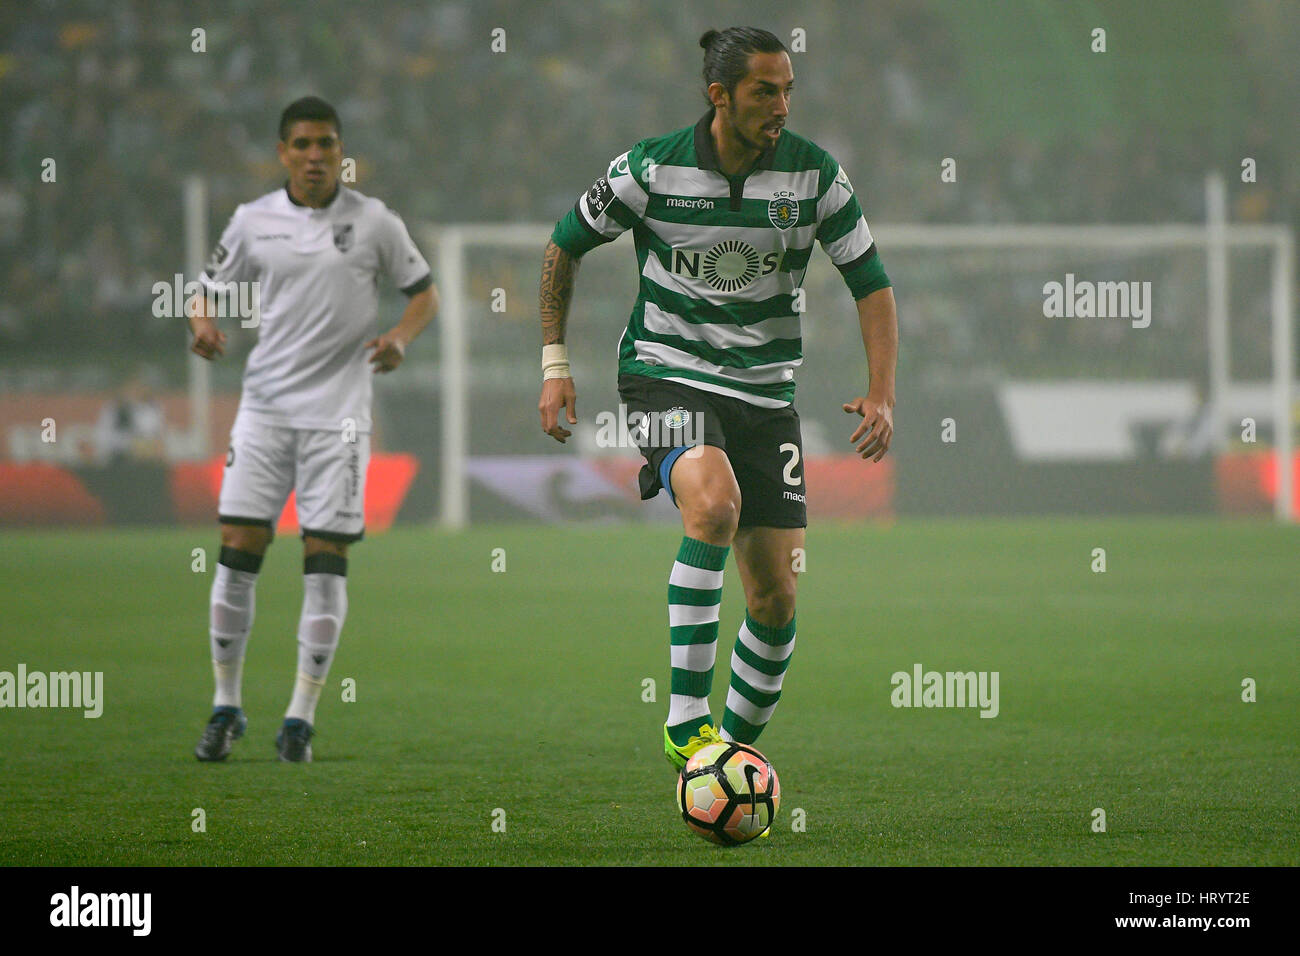 Portugal, Lisbon, Mar. 05, 2017 - FOOTBALL - Schelotto (R), Sporting defender, in action during match between Sporting Clube de Portugal and Vitória Guimarães for Portuguese Football League match at Estádio Alvalade XXI, in Lisbon, Portugal. Credit: Bruno de Carvalho/Alamy Live News Stock Photo